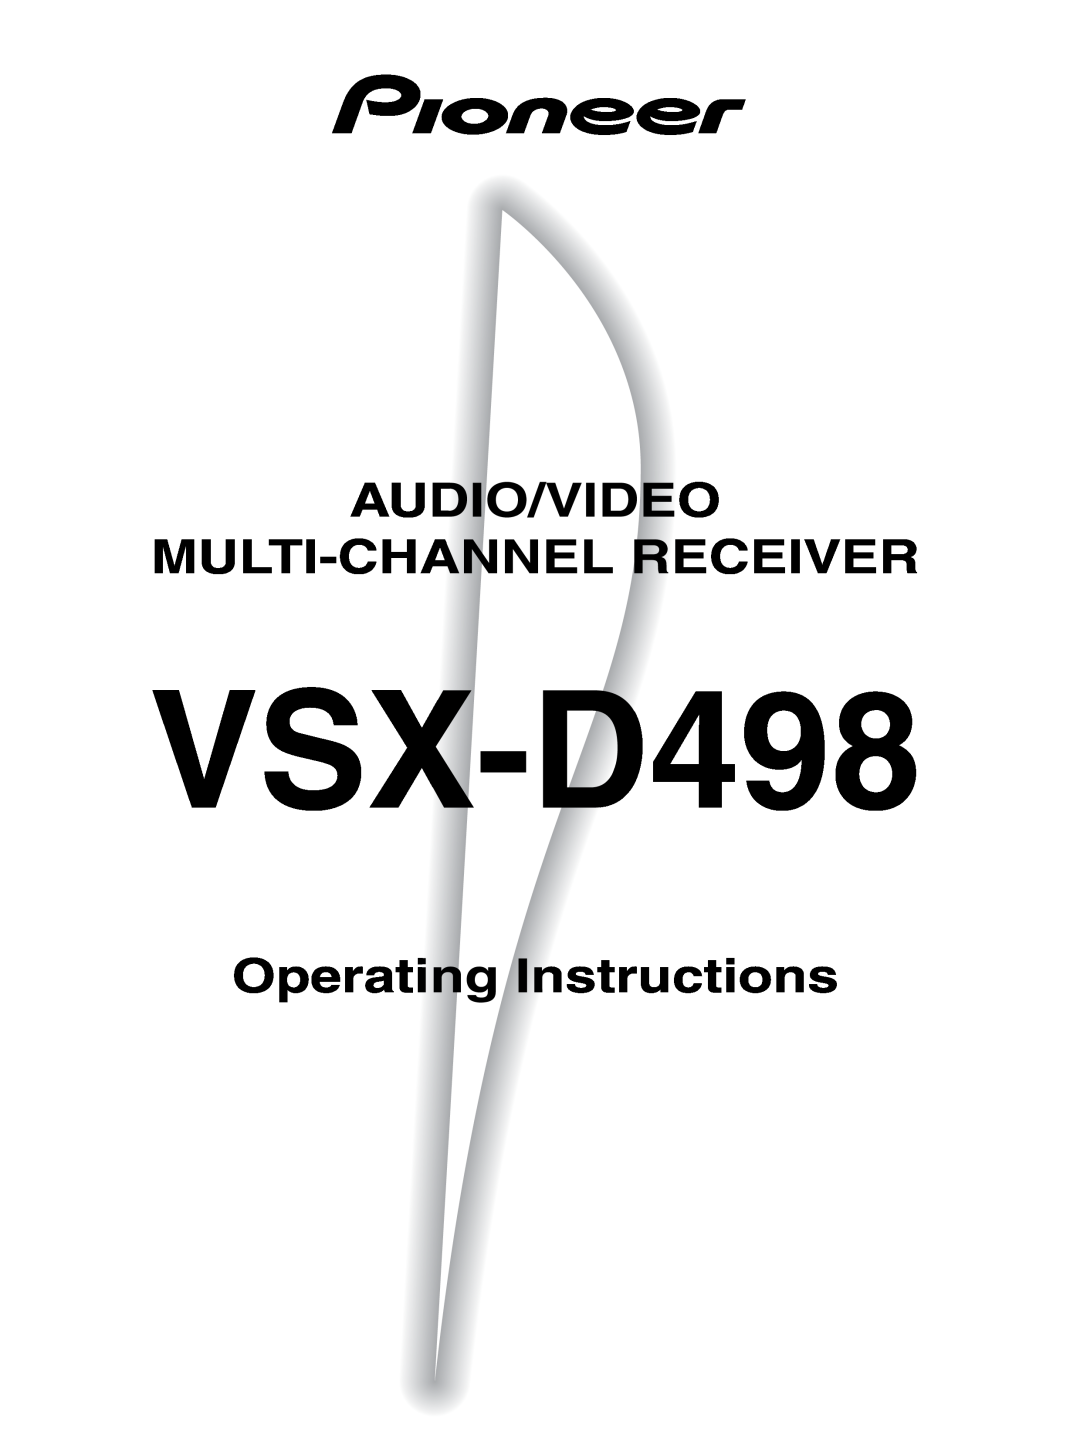 Pioneer VSX-D498 operating instructions Audio/Video Multi-Channelreceiver, Operating Instructions 